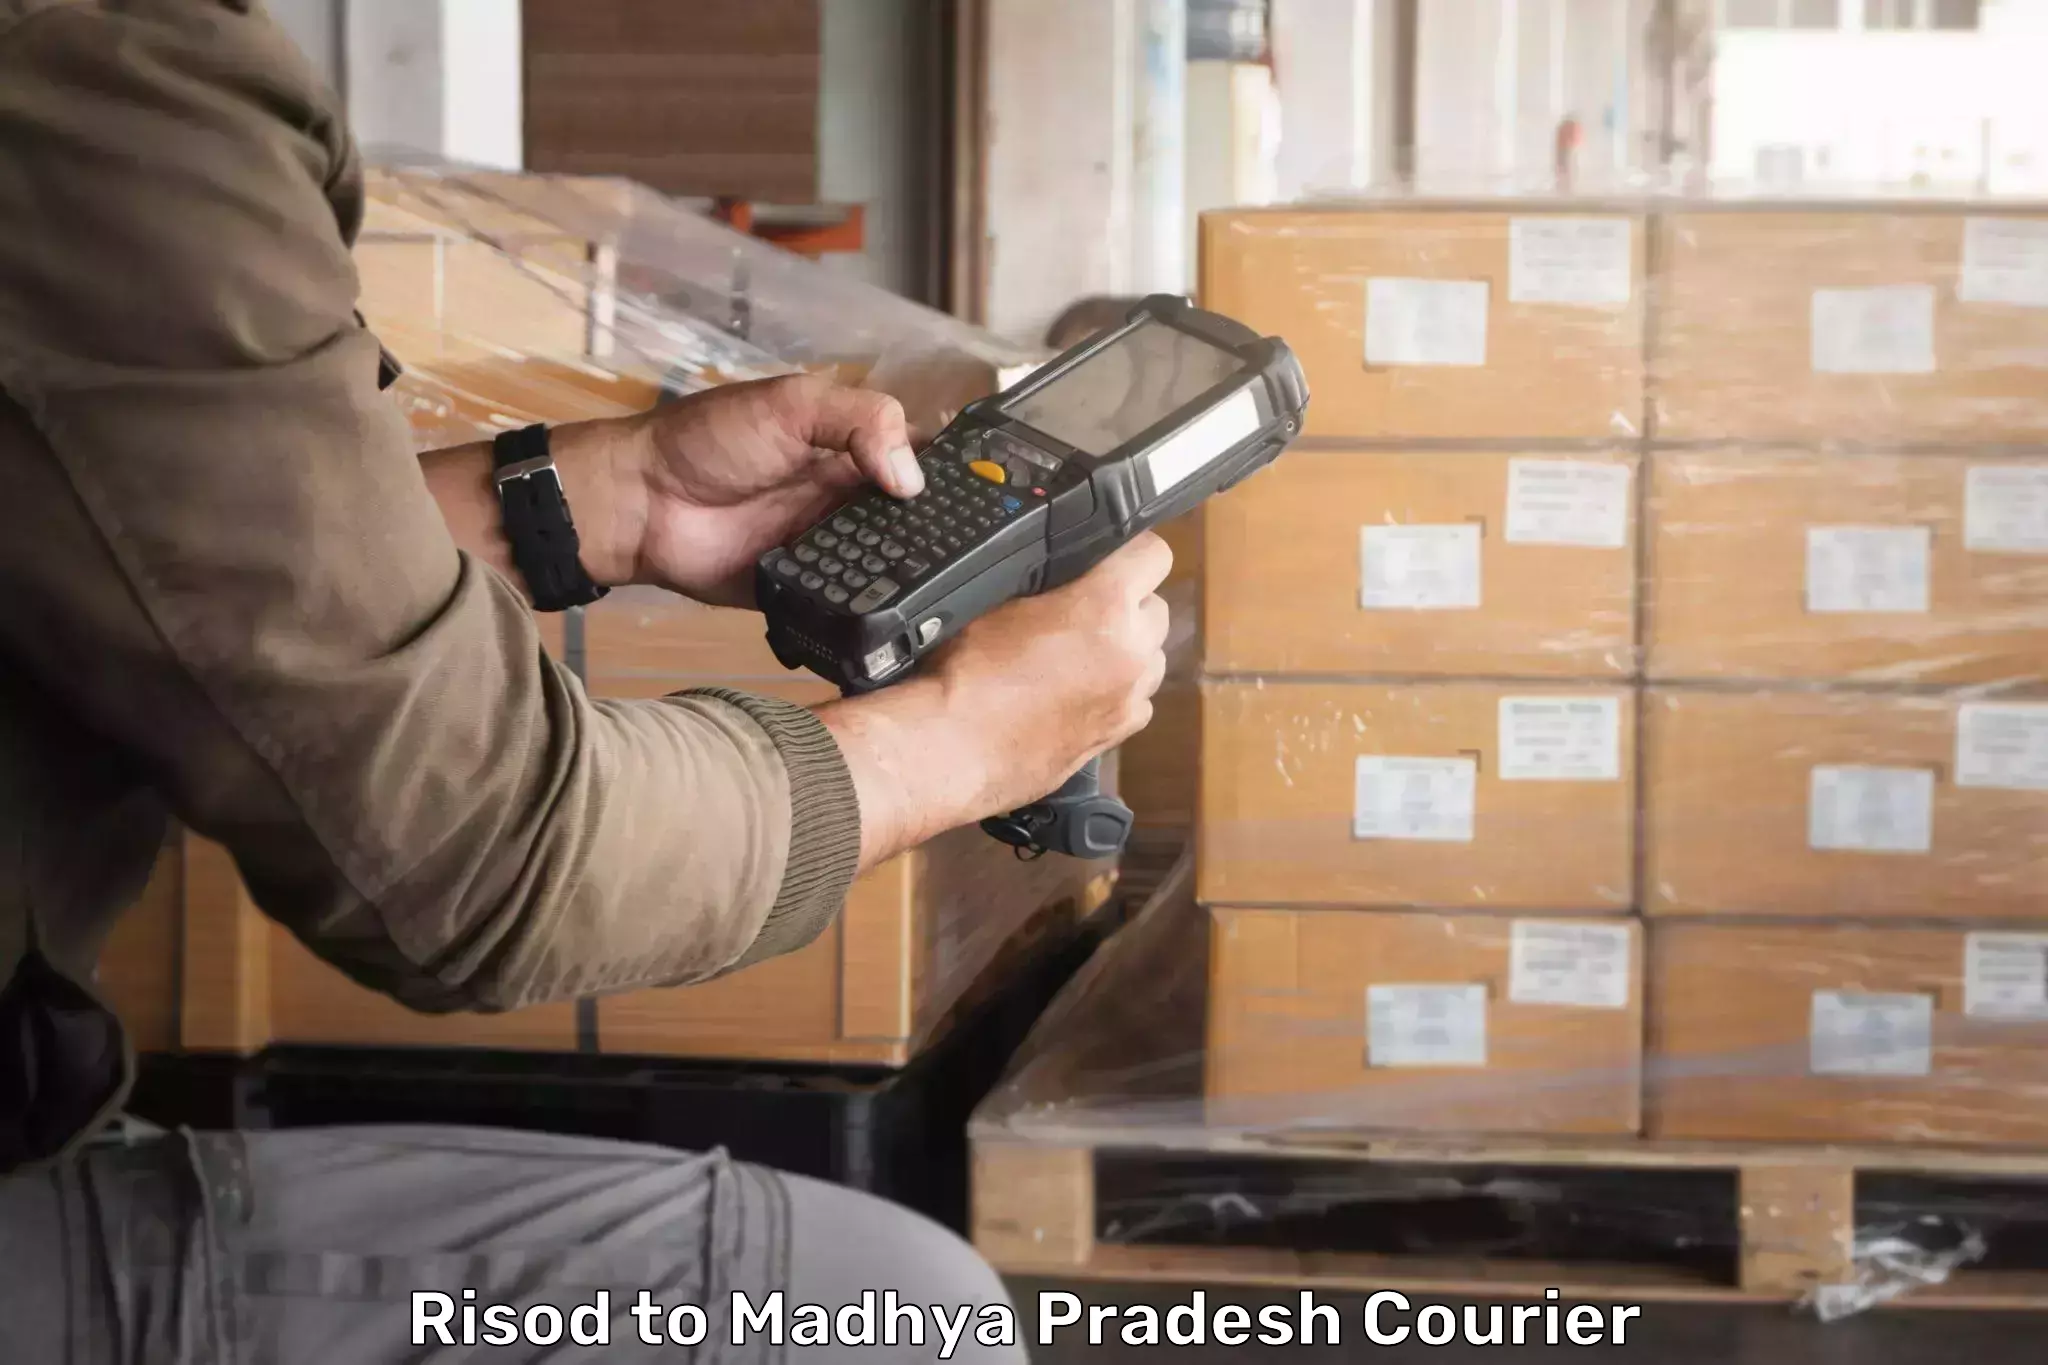 Business shipping needs in Risod to Jhabua